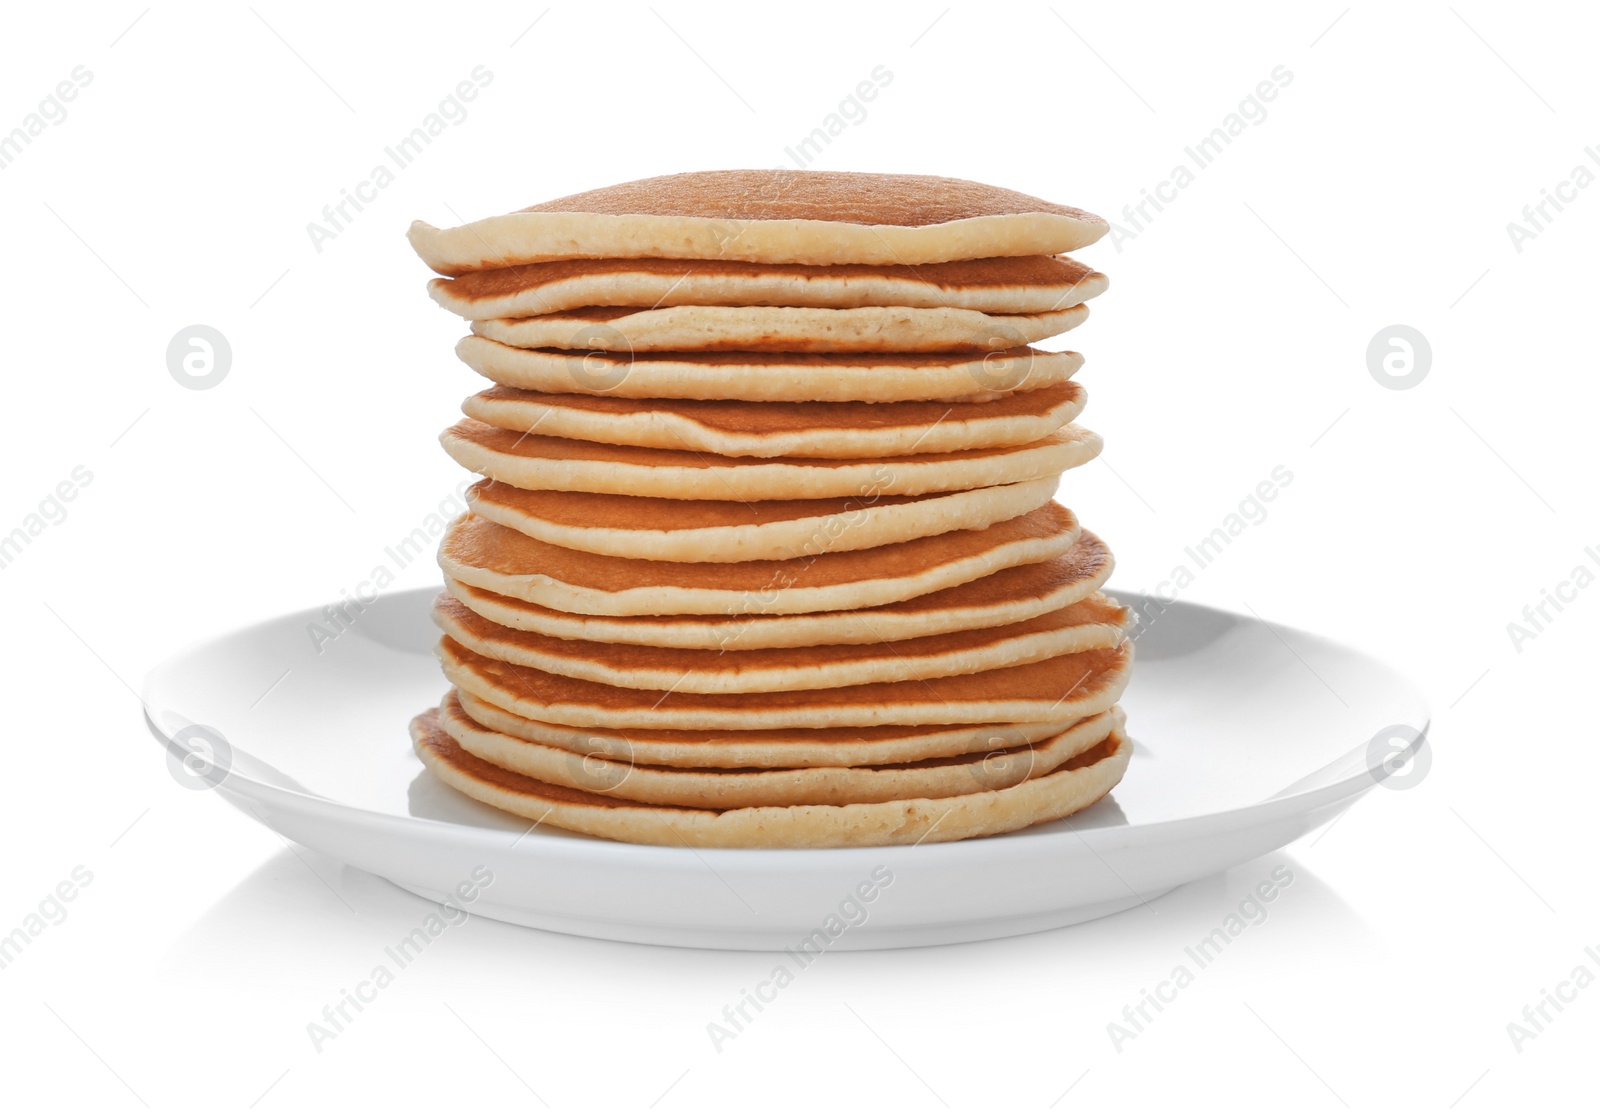 Photo of Plate with stack of tasty pancakes on white background